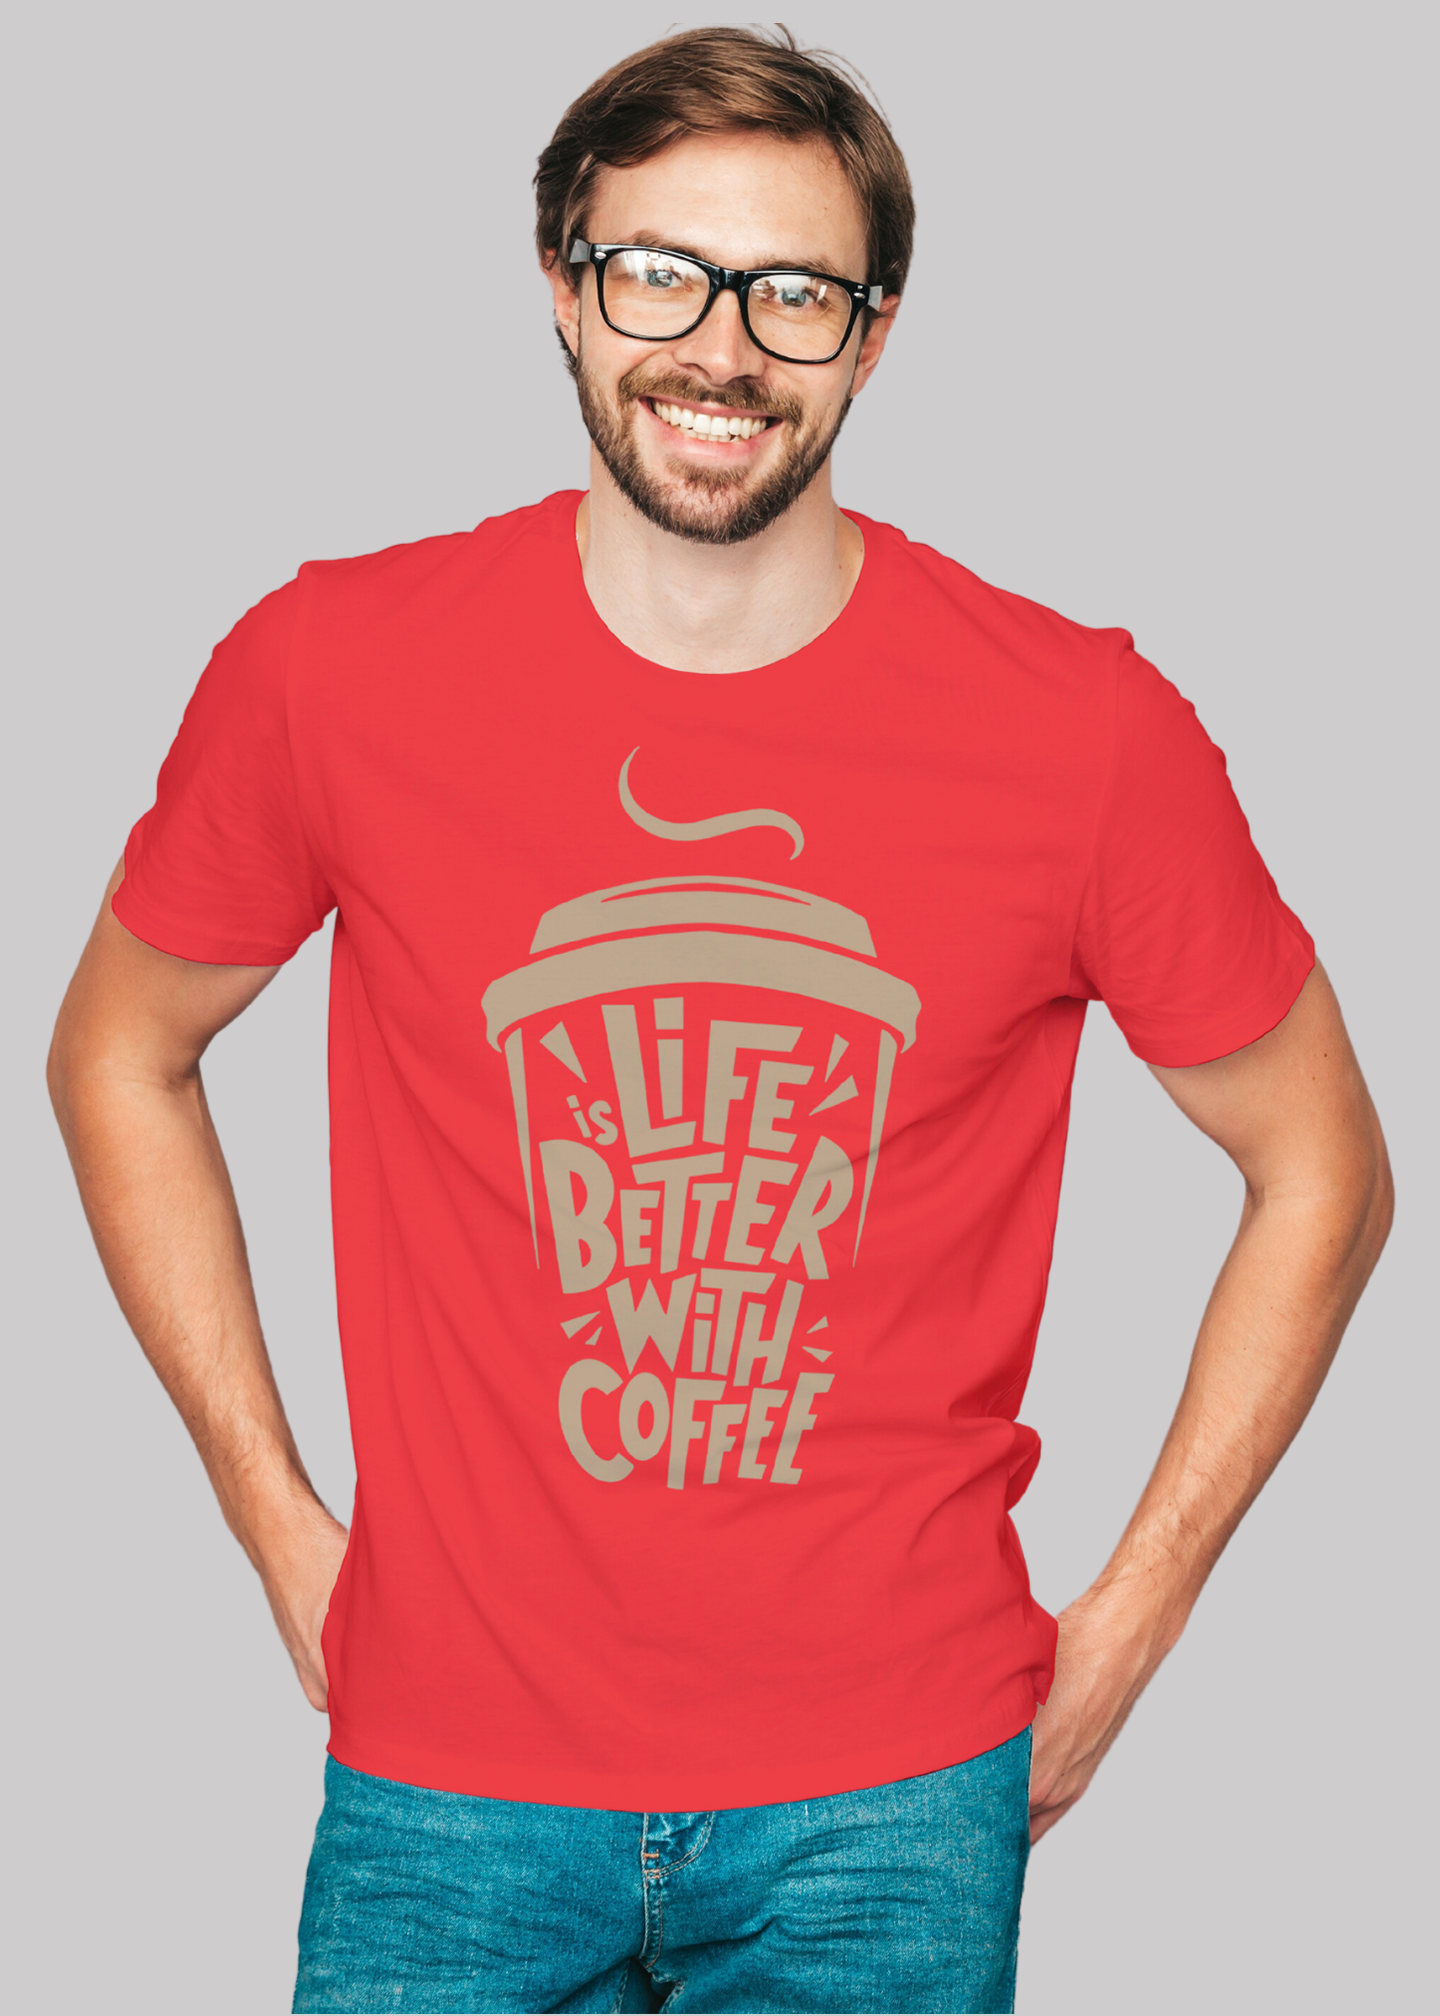 Life is better with coffee Printed Half Sleeve Premium Cotton T-shirt For Men